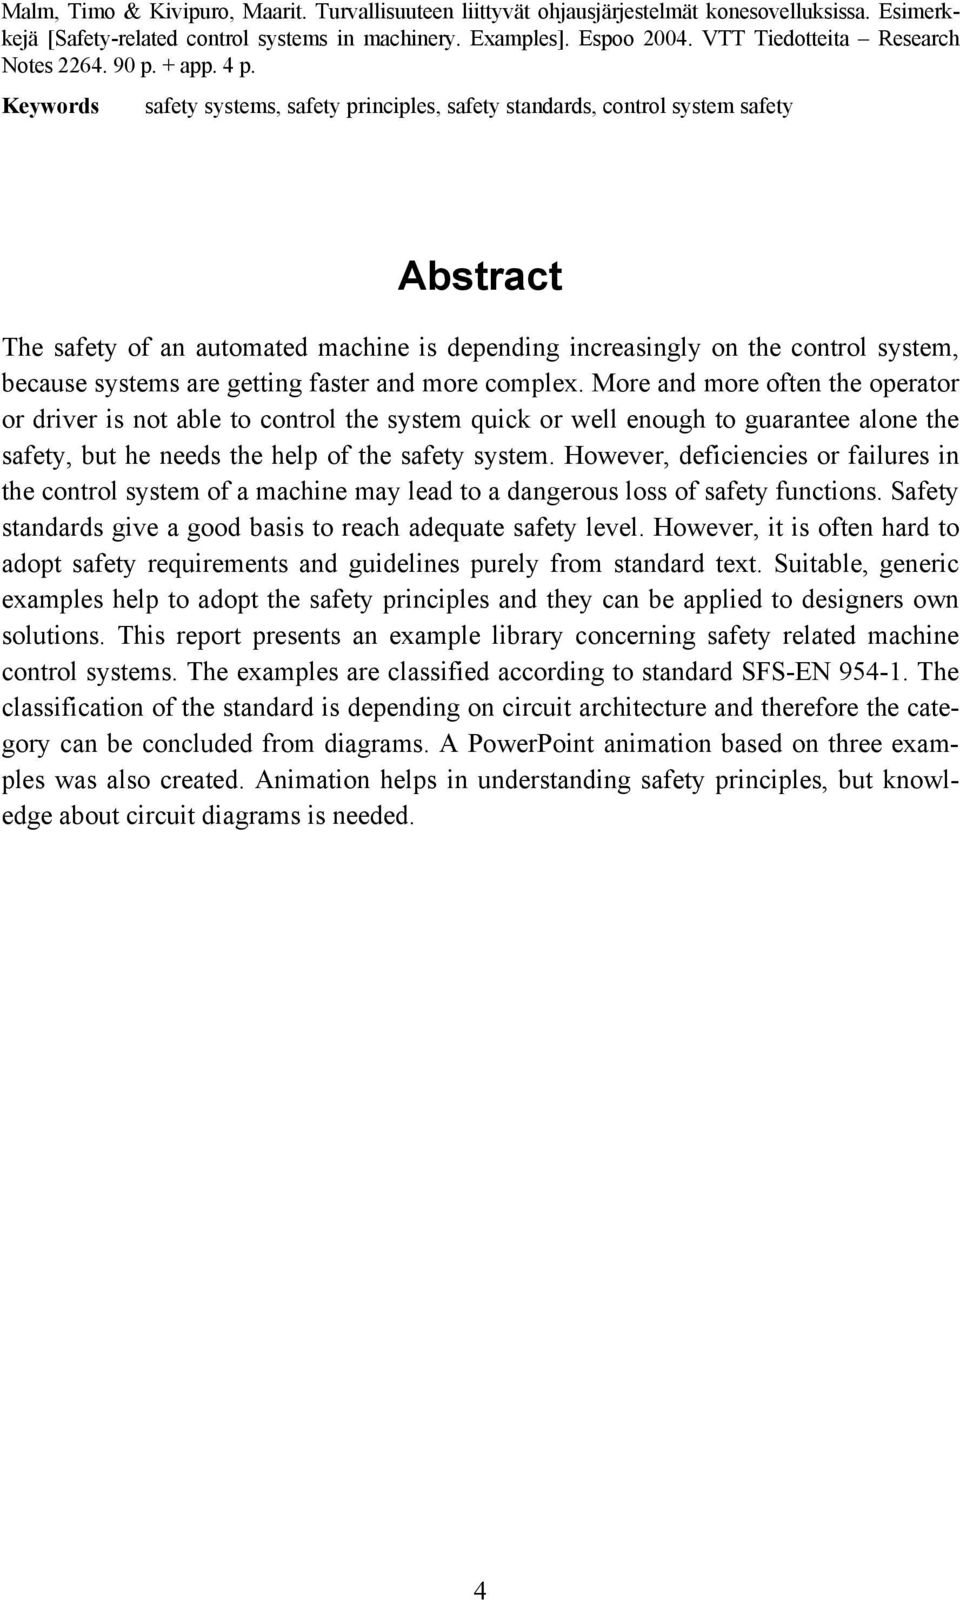 Keywords safety systems, safety principles, safety standards, control system safety Abstract The safety of an automated machine is depending increasingly on the control system, because systems are